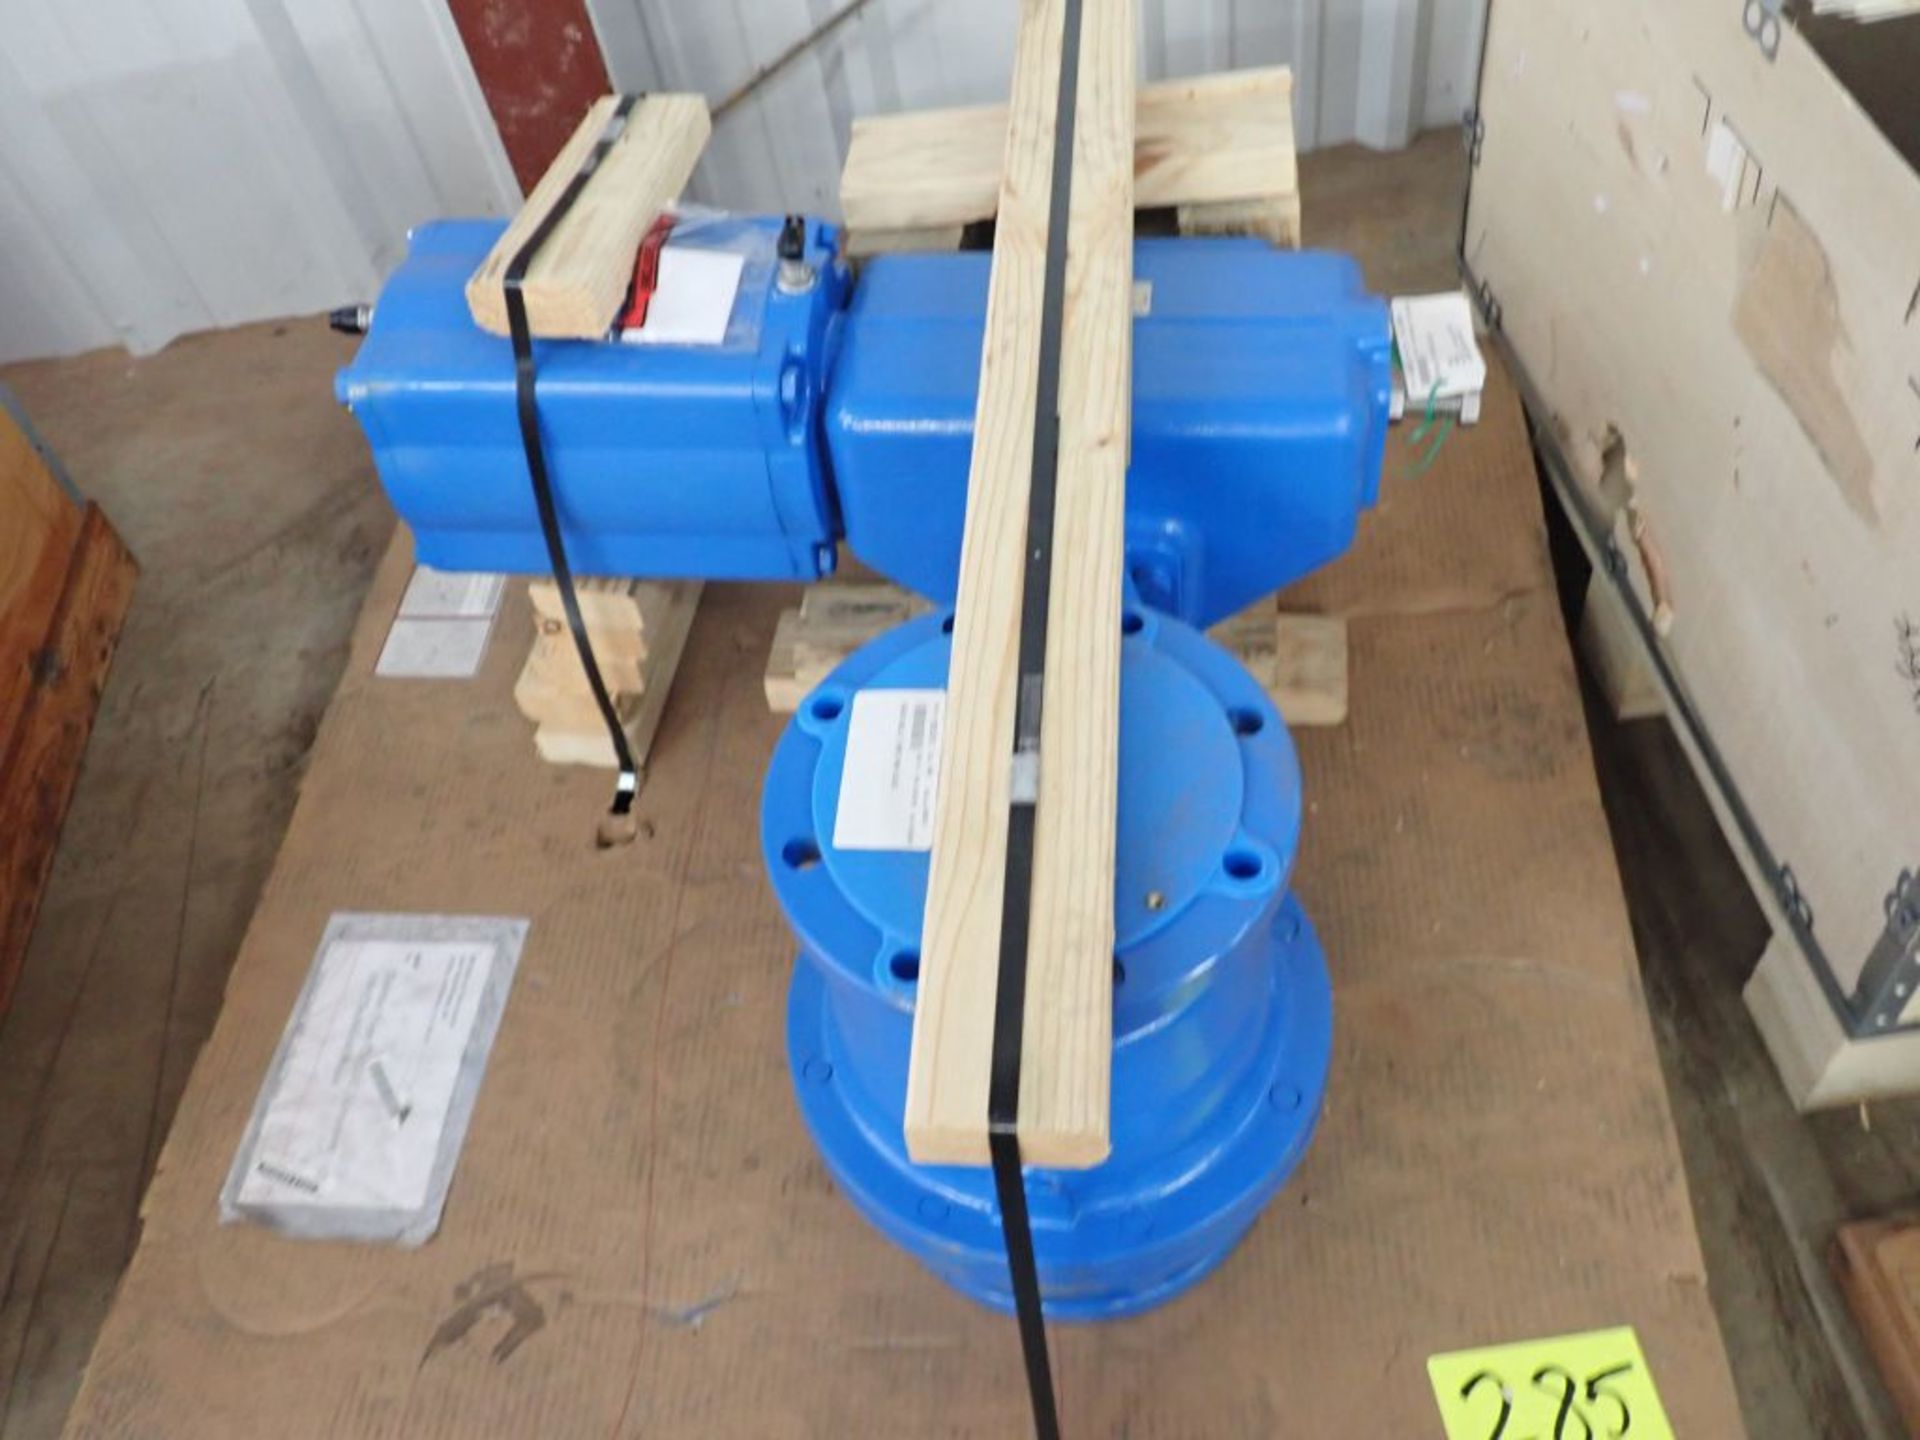 Metso Ball Valve Assembly - Bin No. 3D9D4C; Size: 6"; Tag: 215809